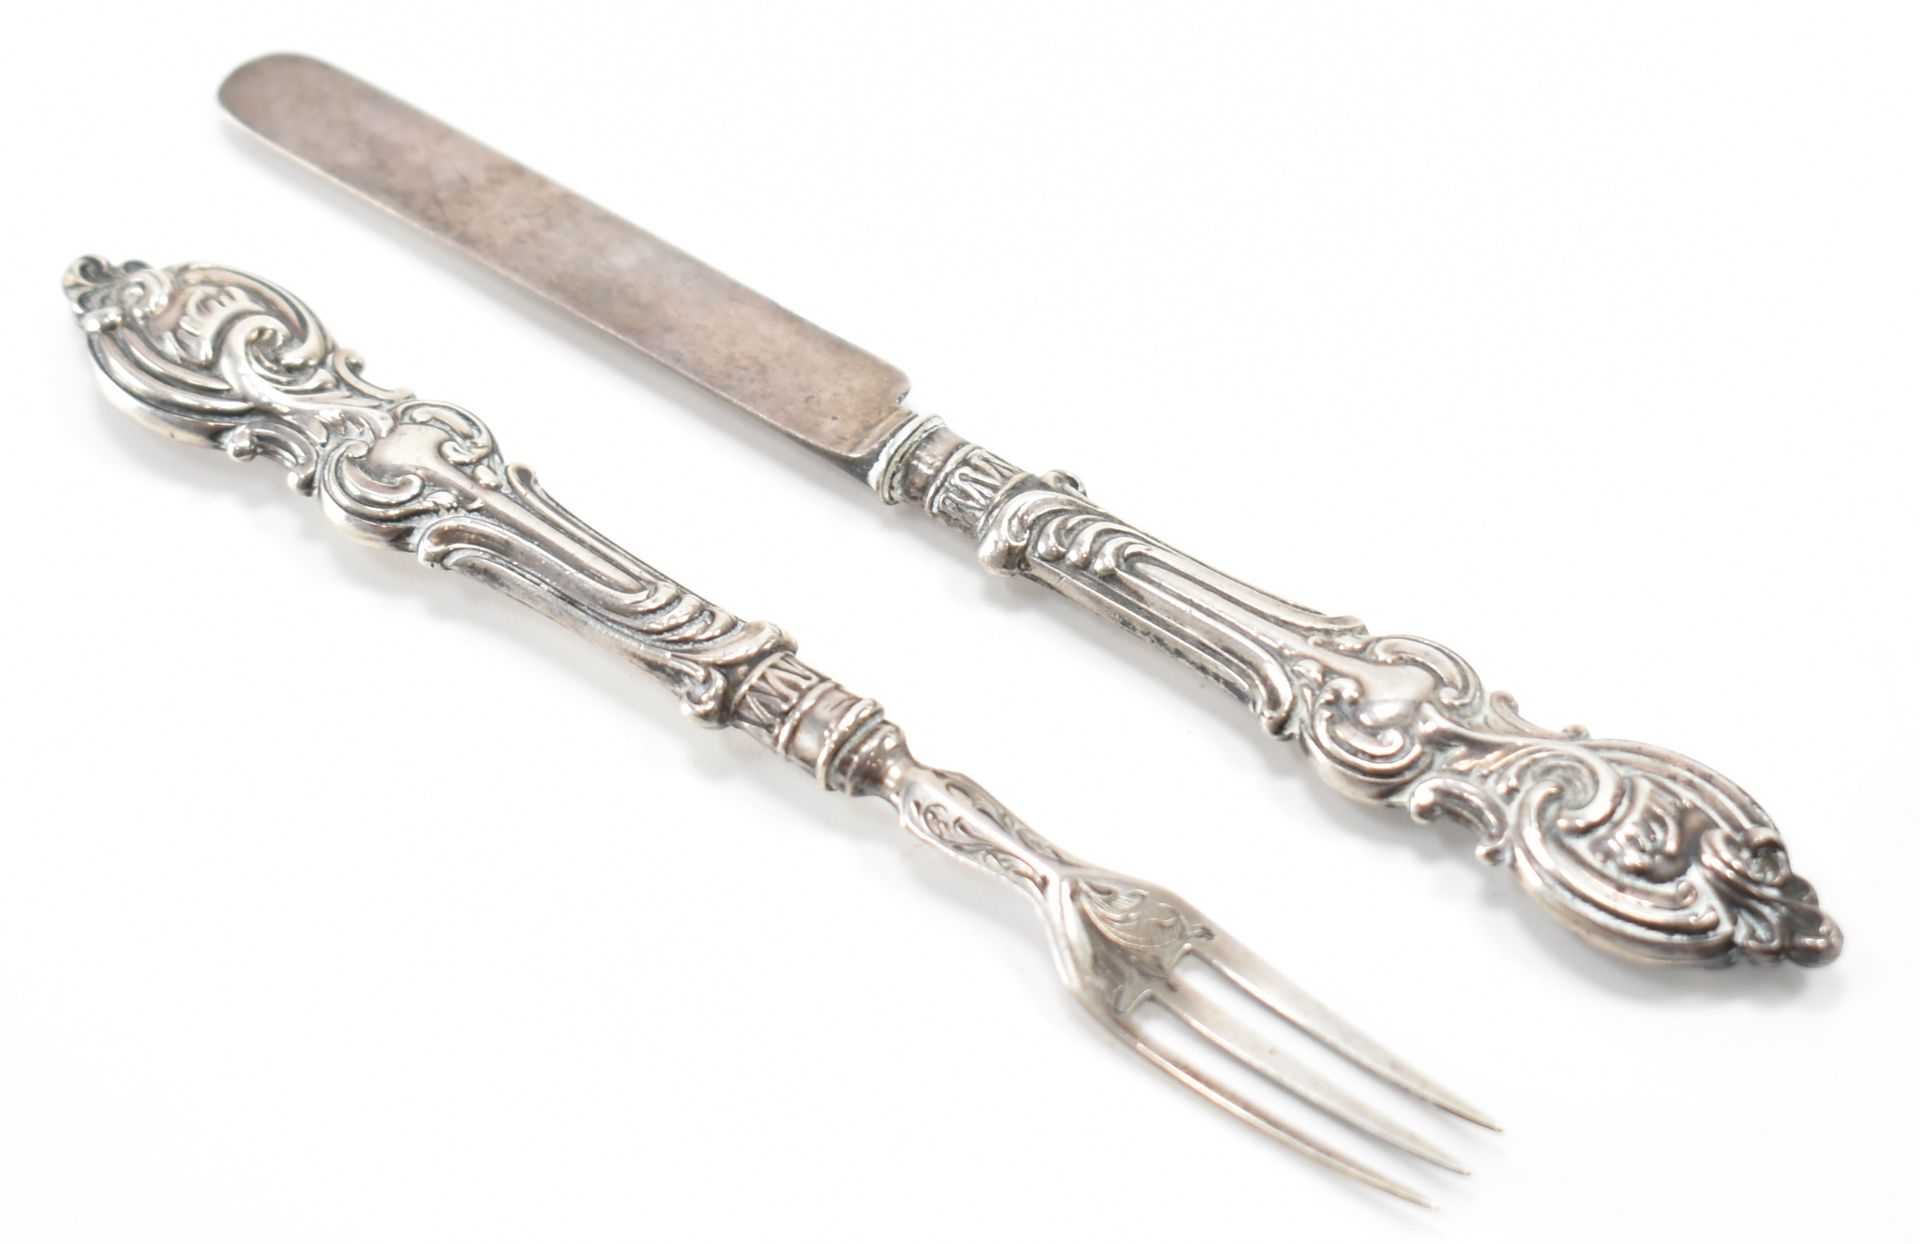 1930S SILVER HALLMARKED SMALL KNIFE & FORK - Image 2 of 5